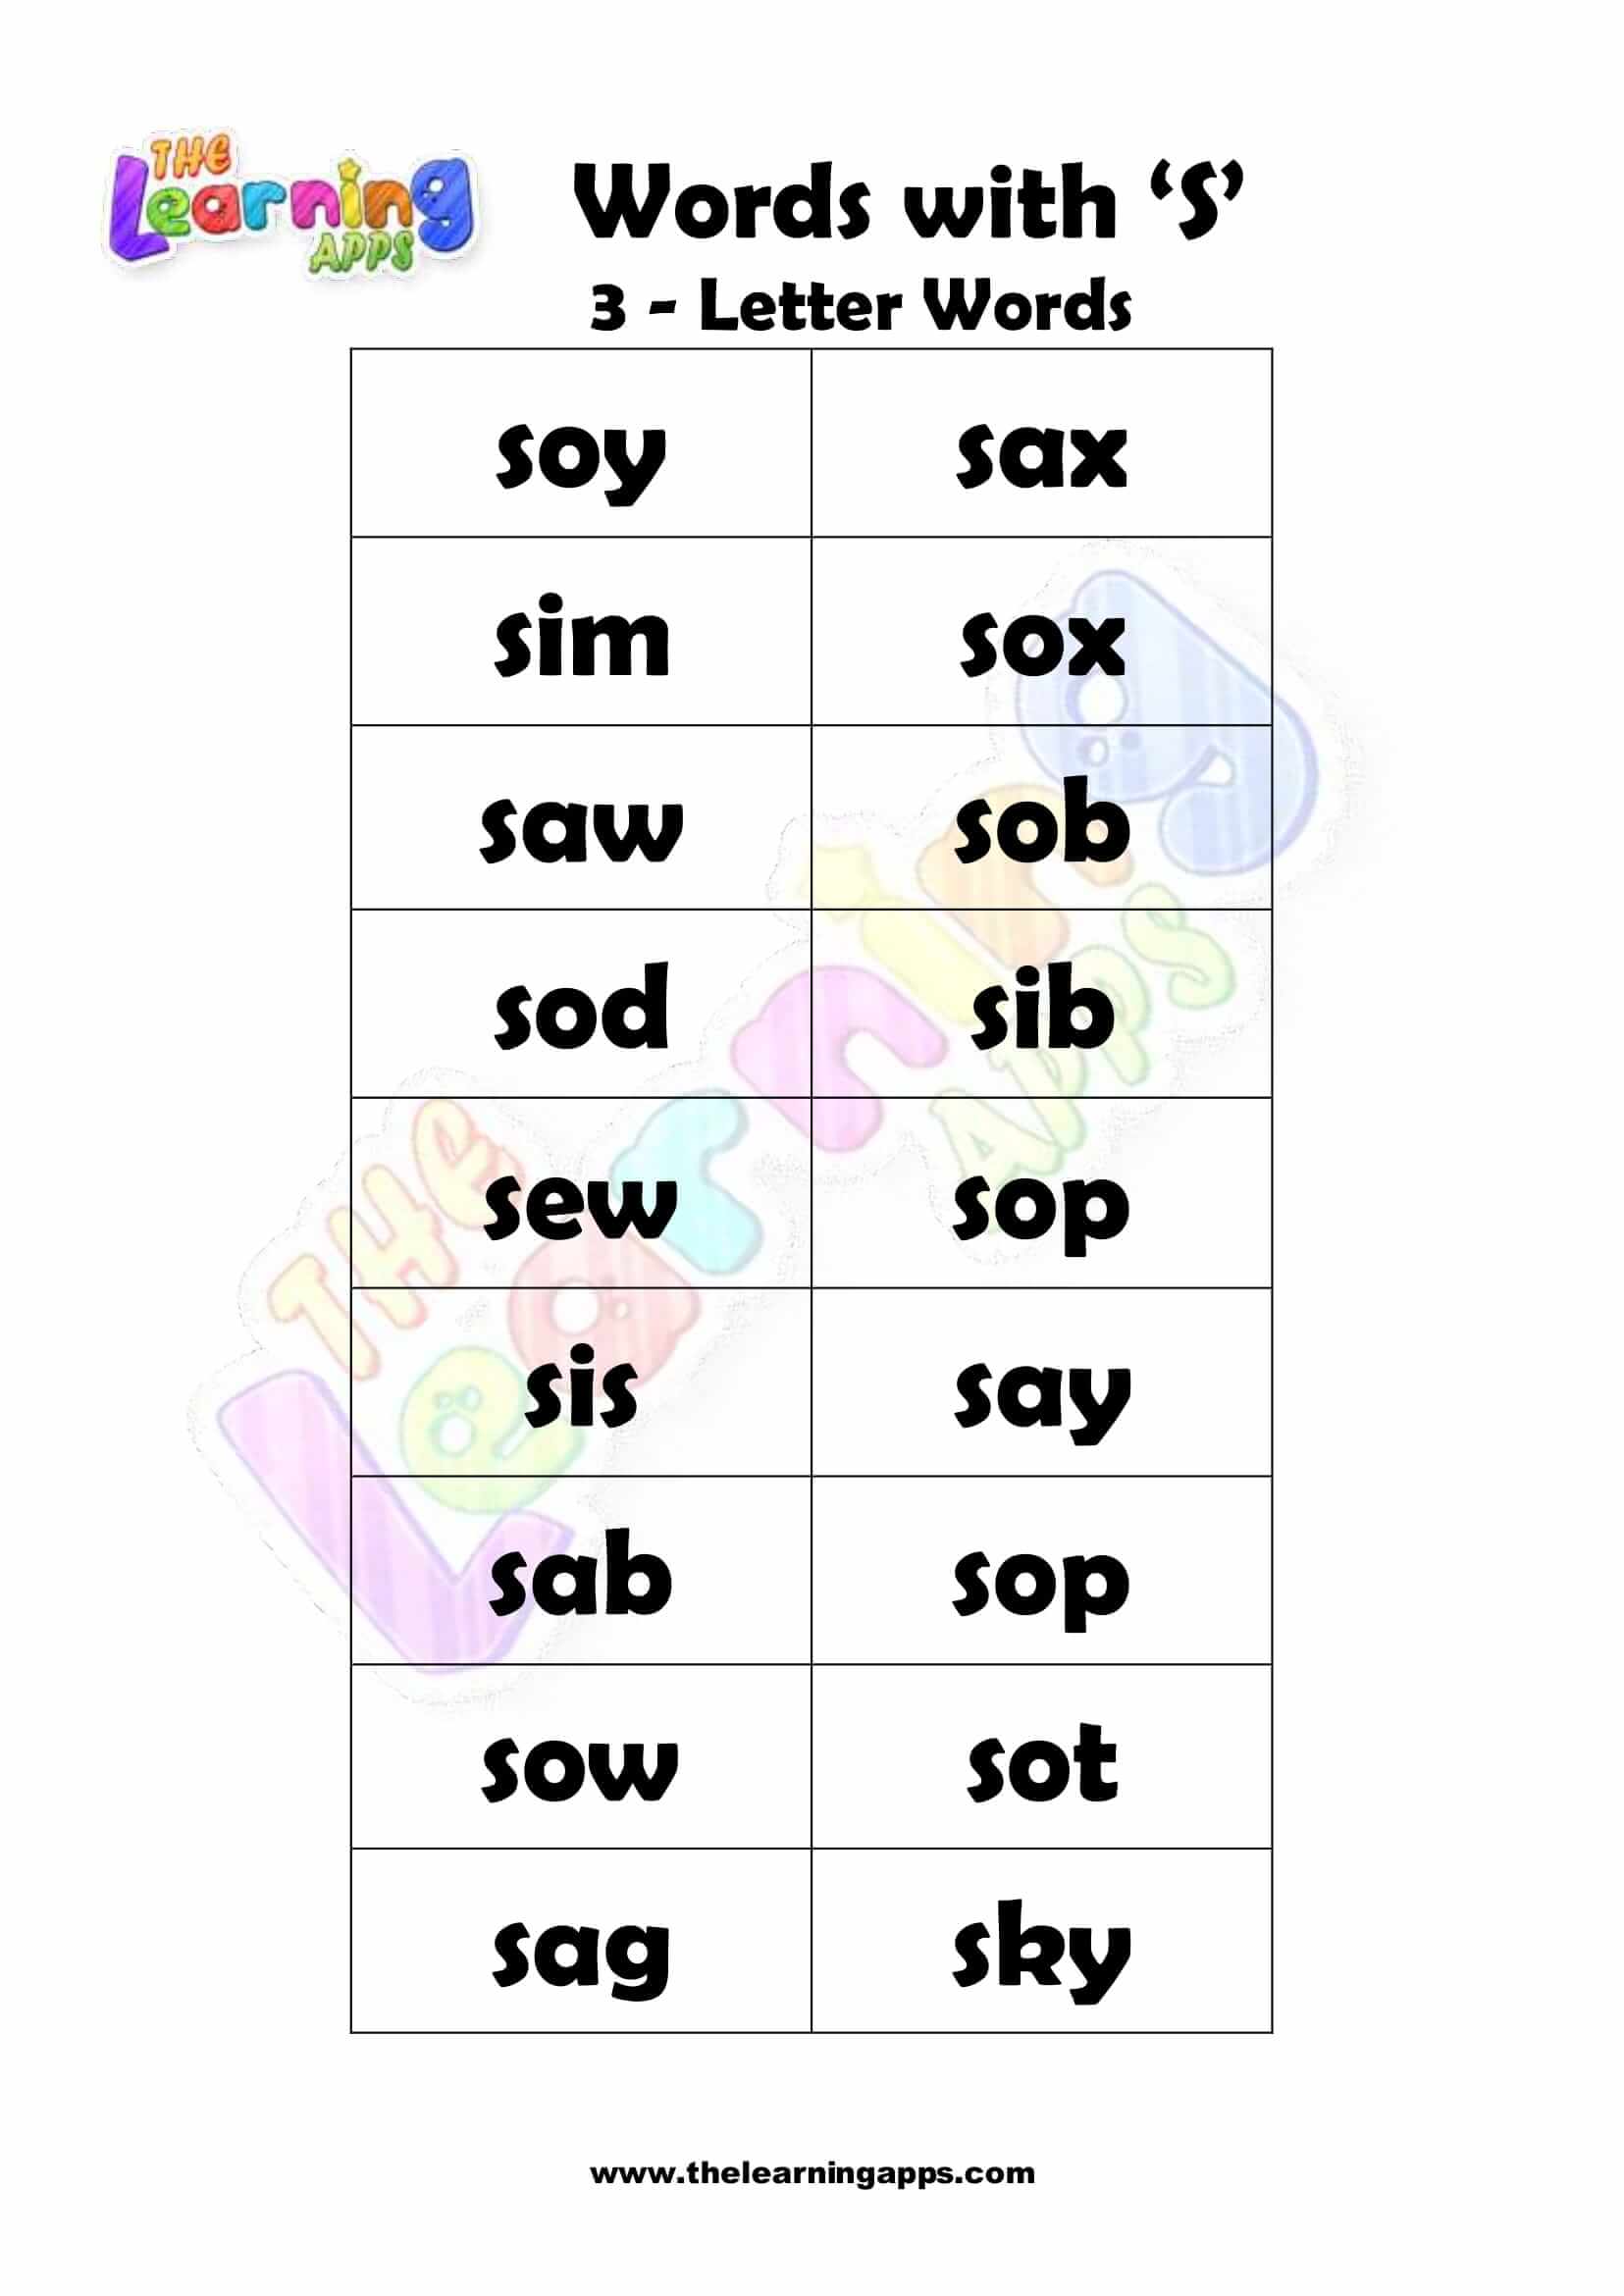 3 LETTER WORD STARTING WITH S-2